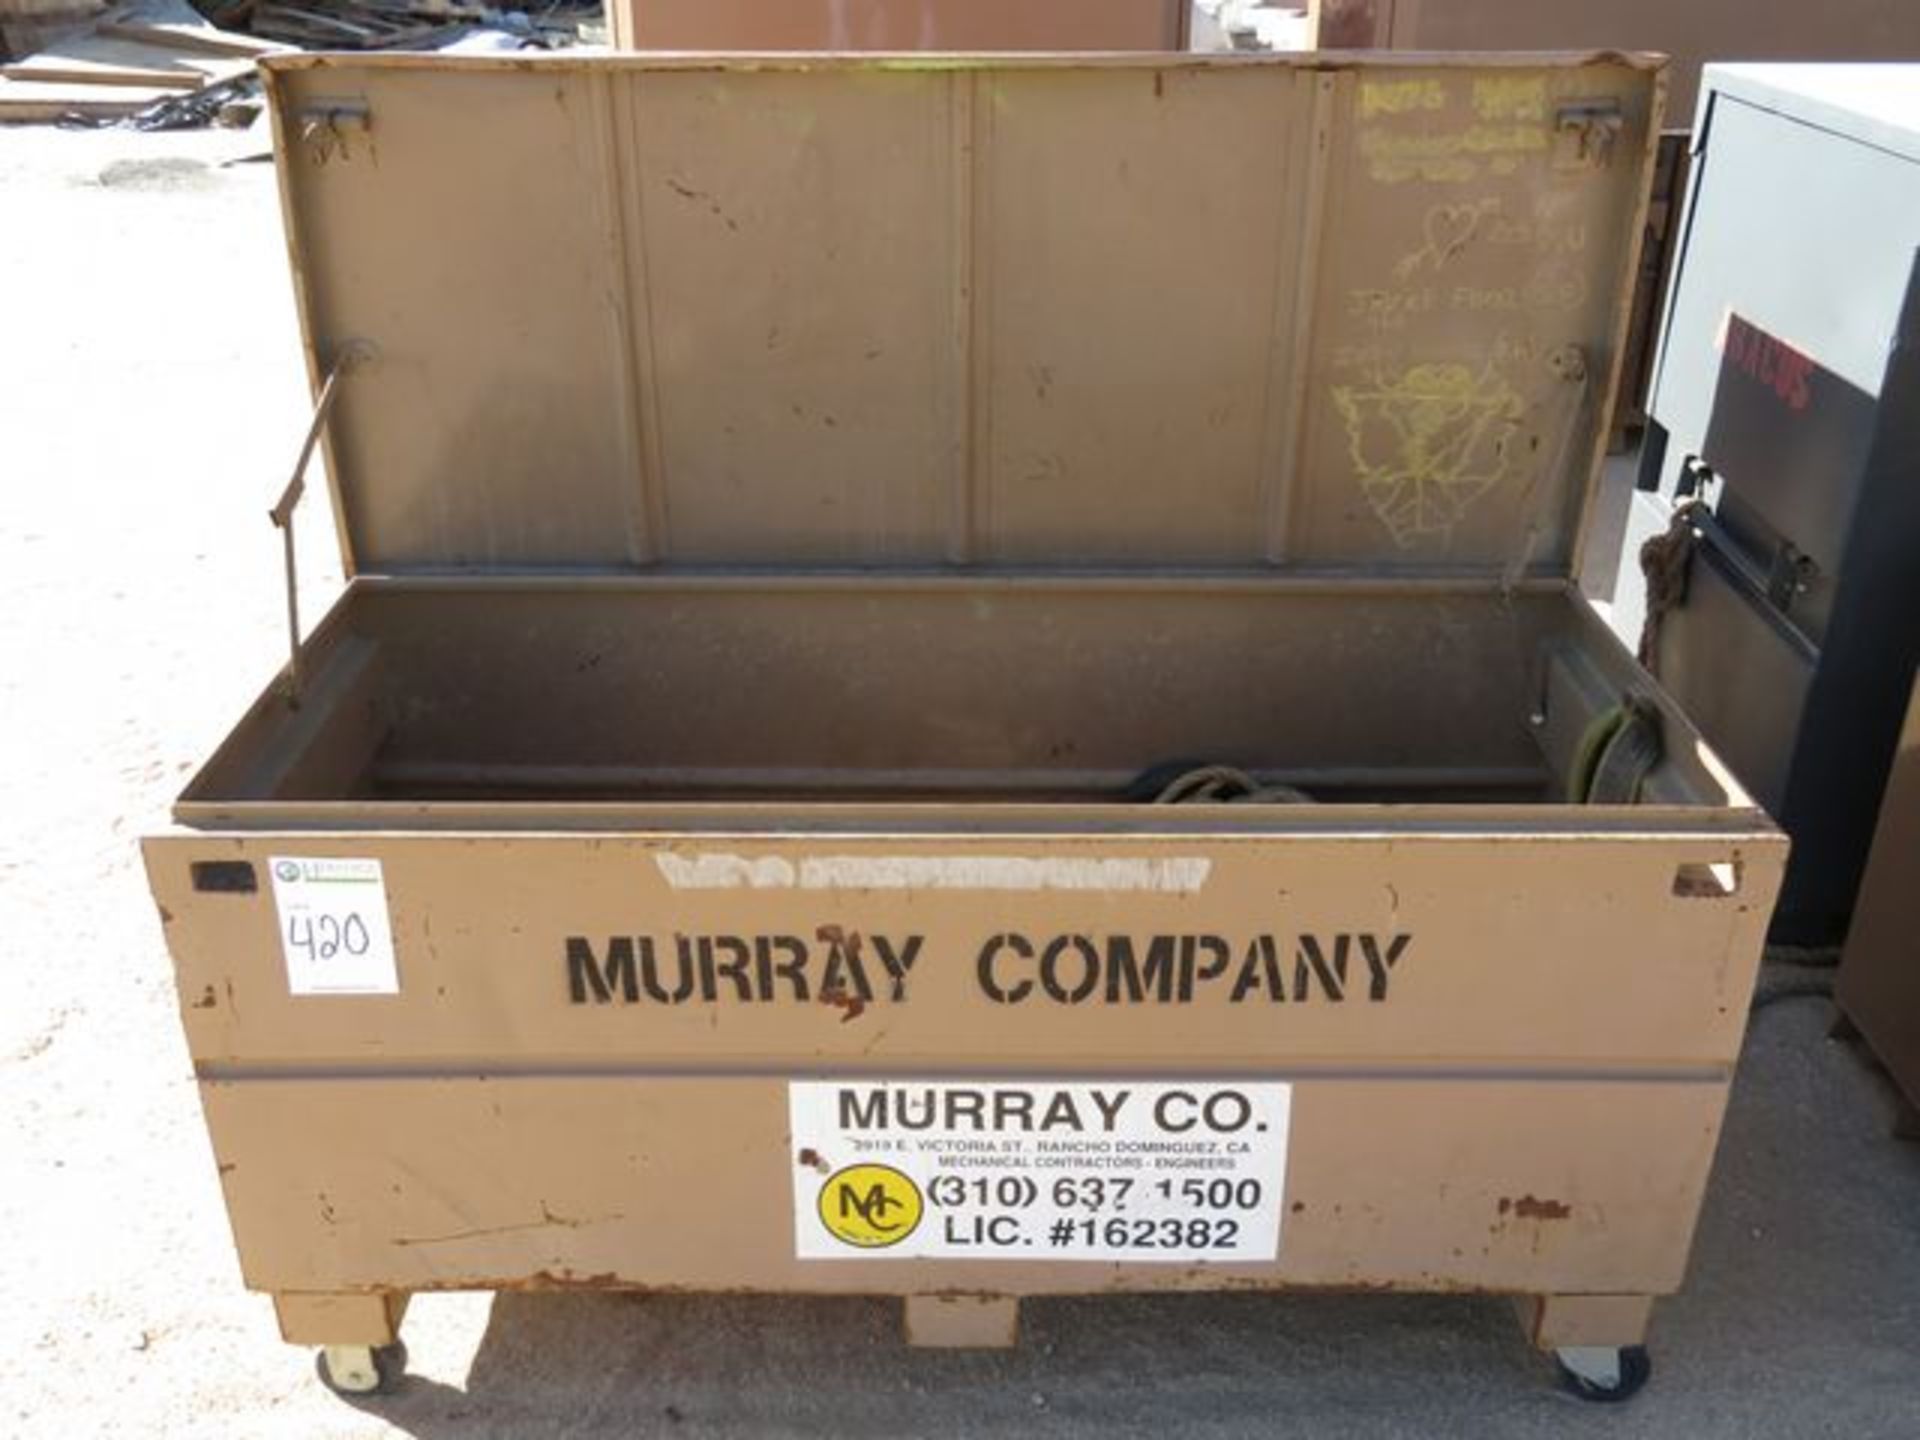 Murray Tool Chest. 60" x 24" x 33", on Castors. Asset Located at 42134 Harper Lake Road, Hinkley, CA - Image 2 of 3